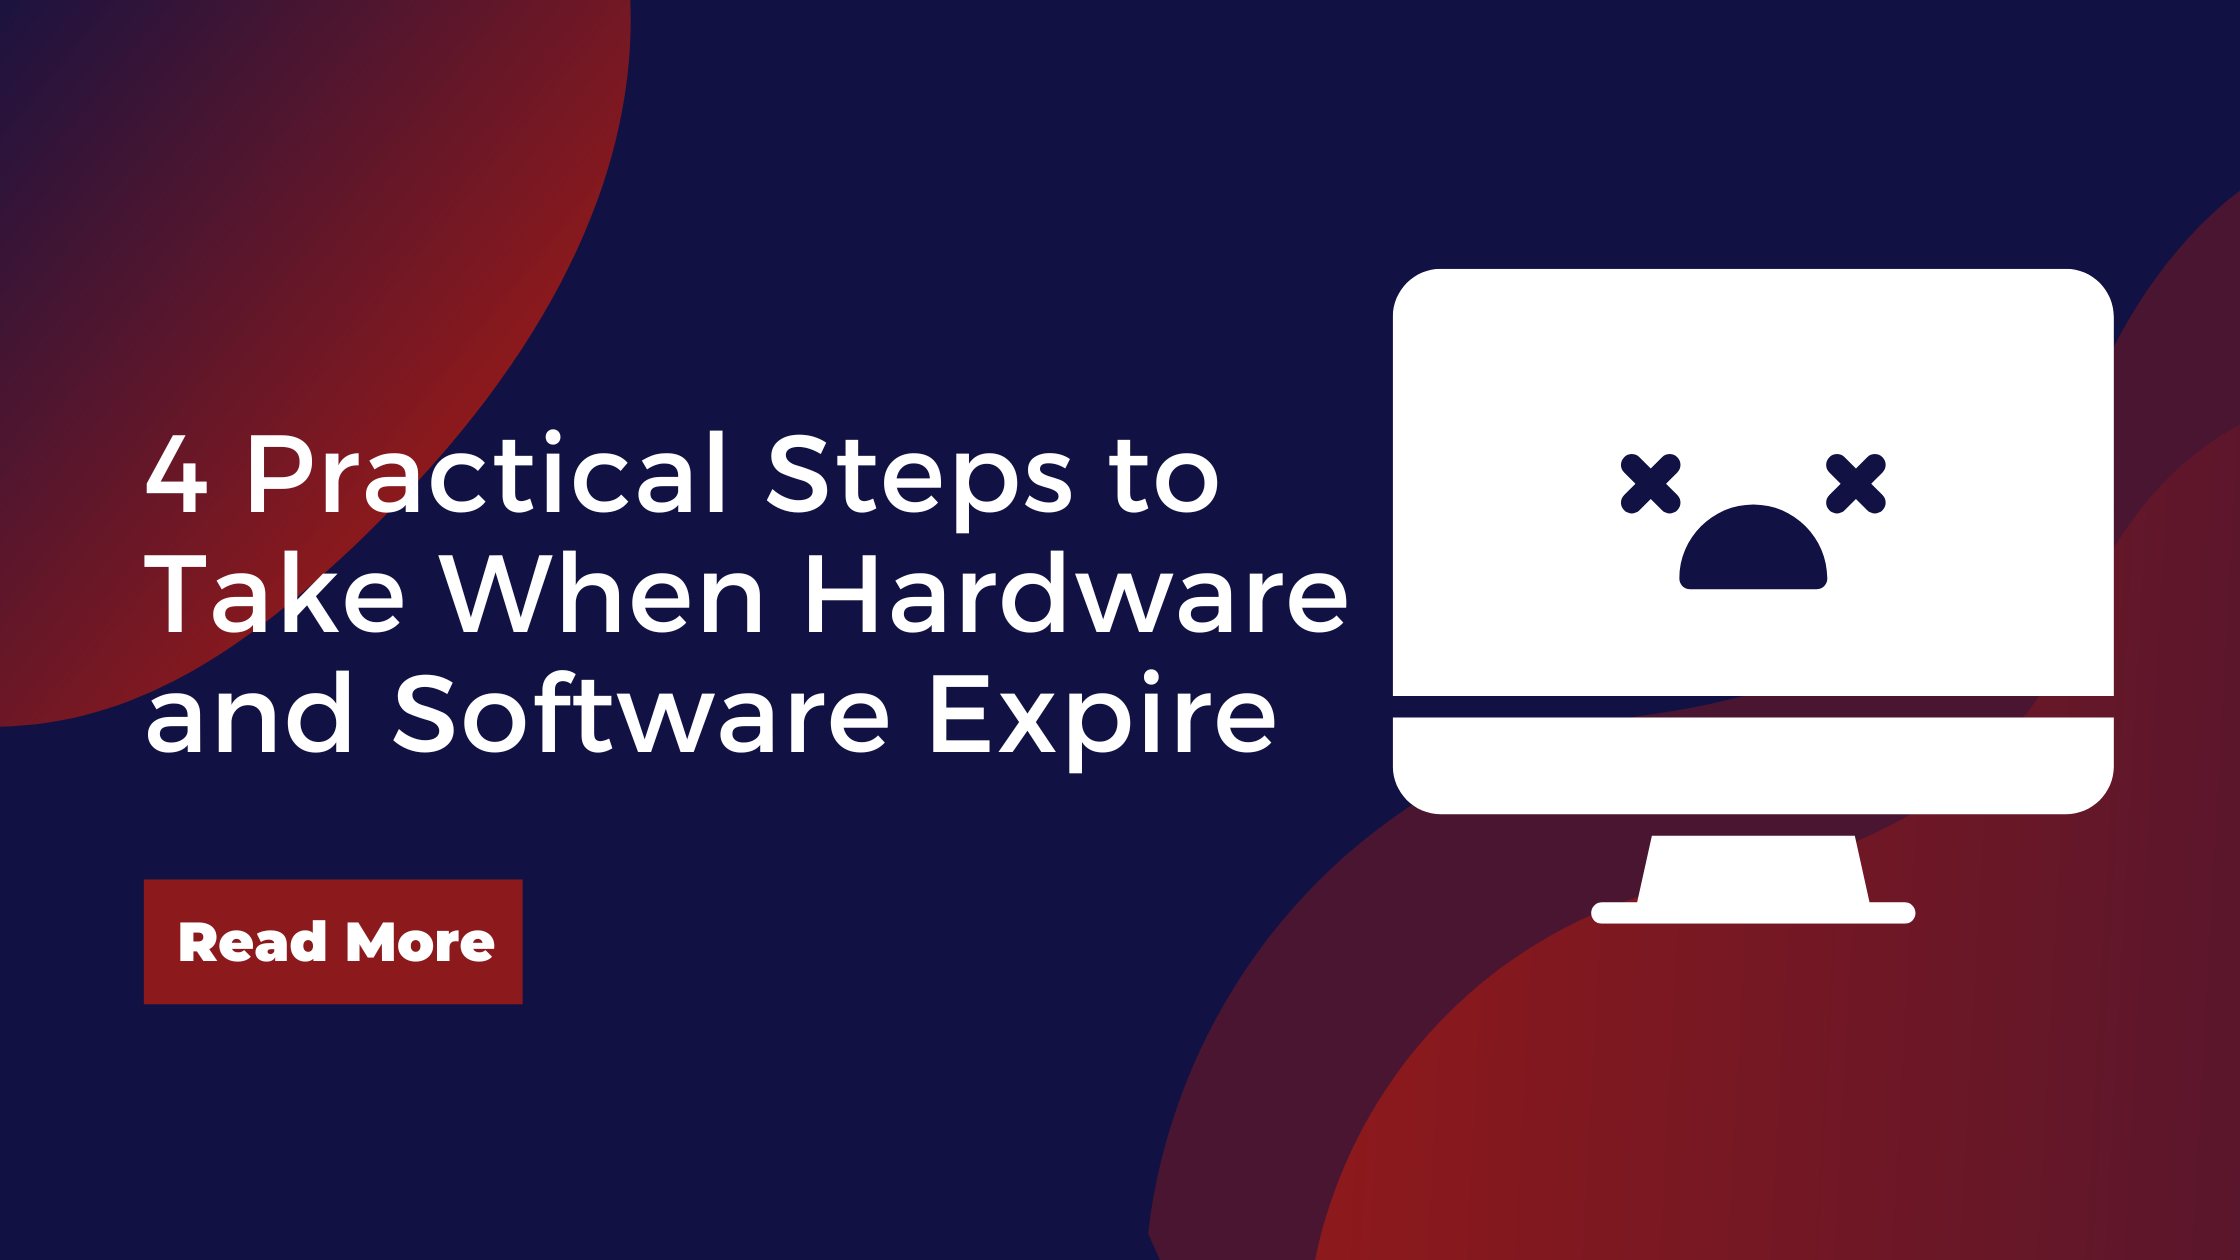 4 Practical Steps to Take When Hardware & Software Expire